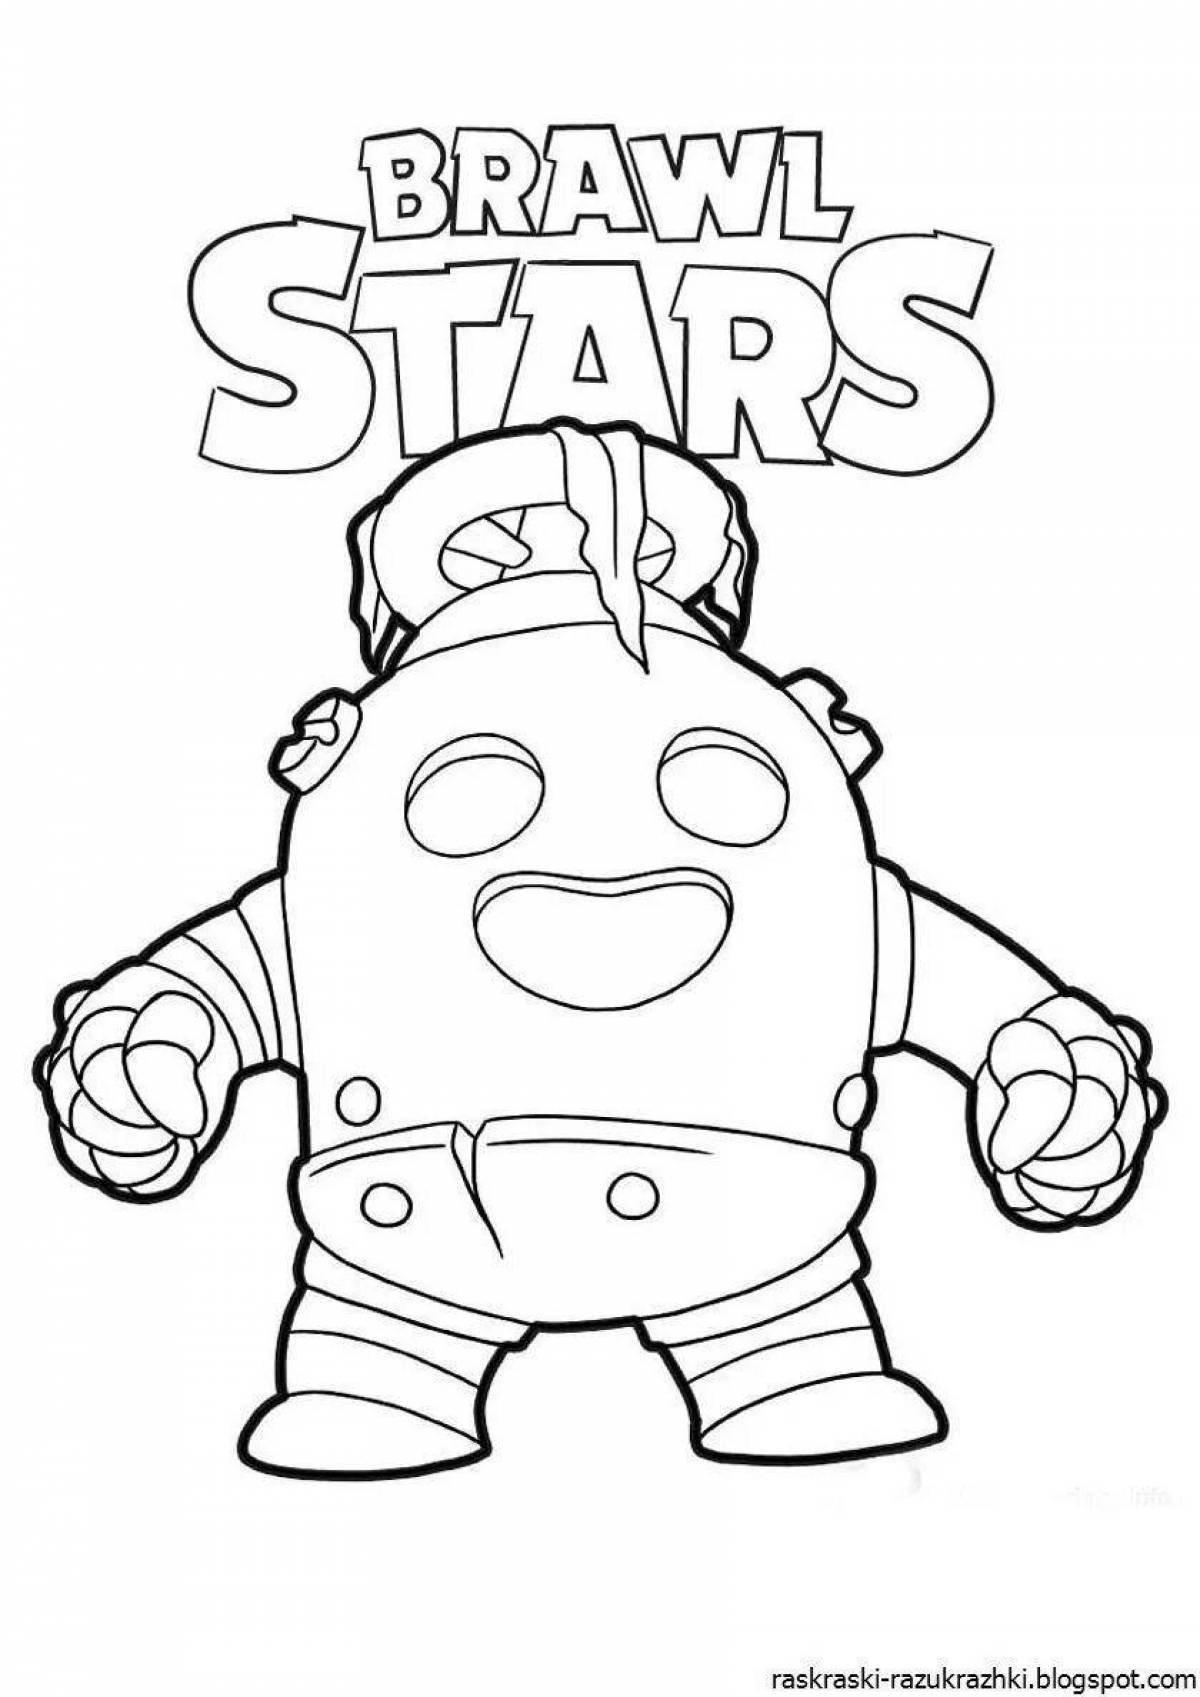 Playful browstars coloring for kids